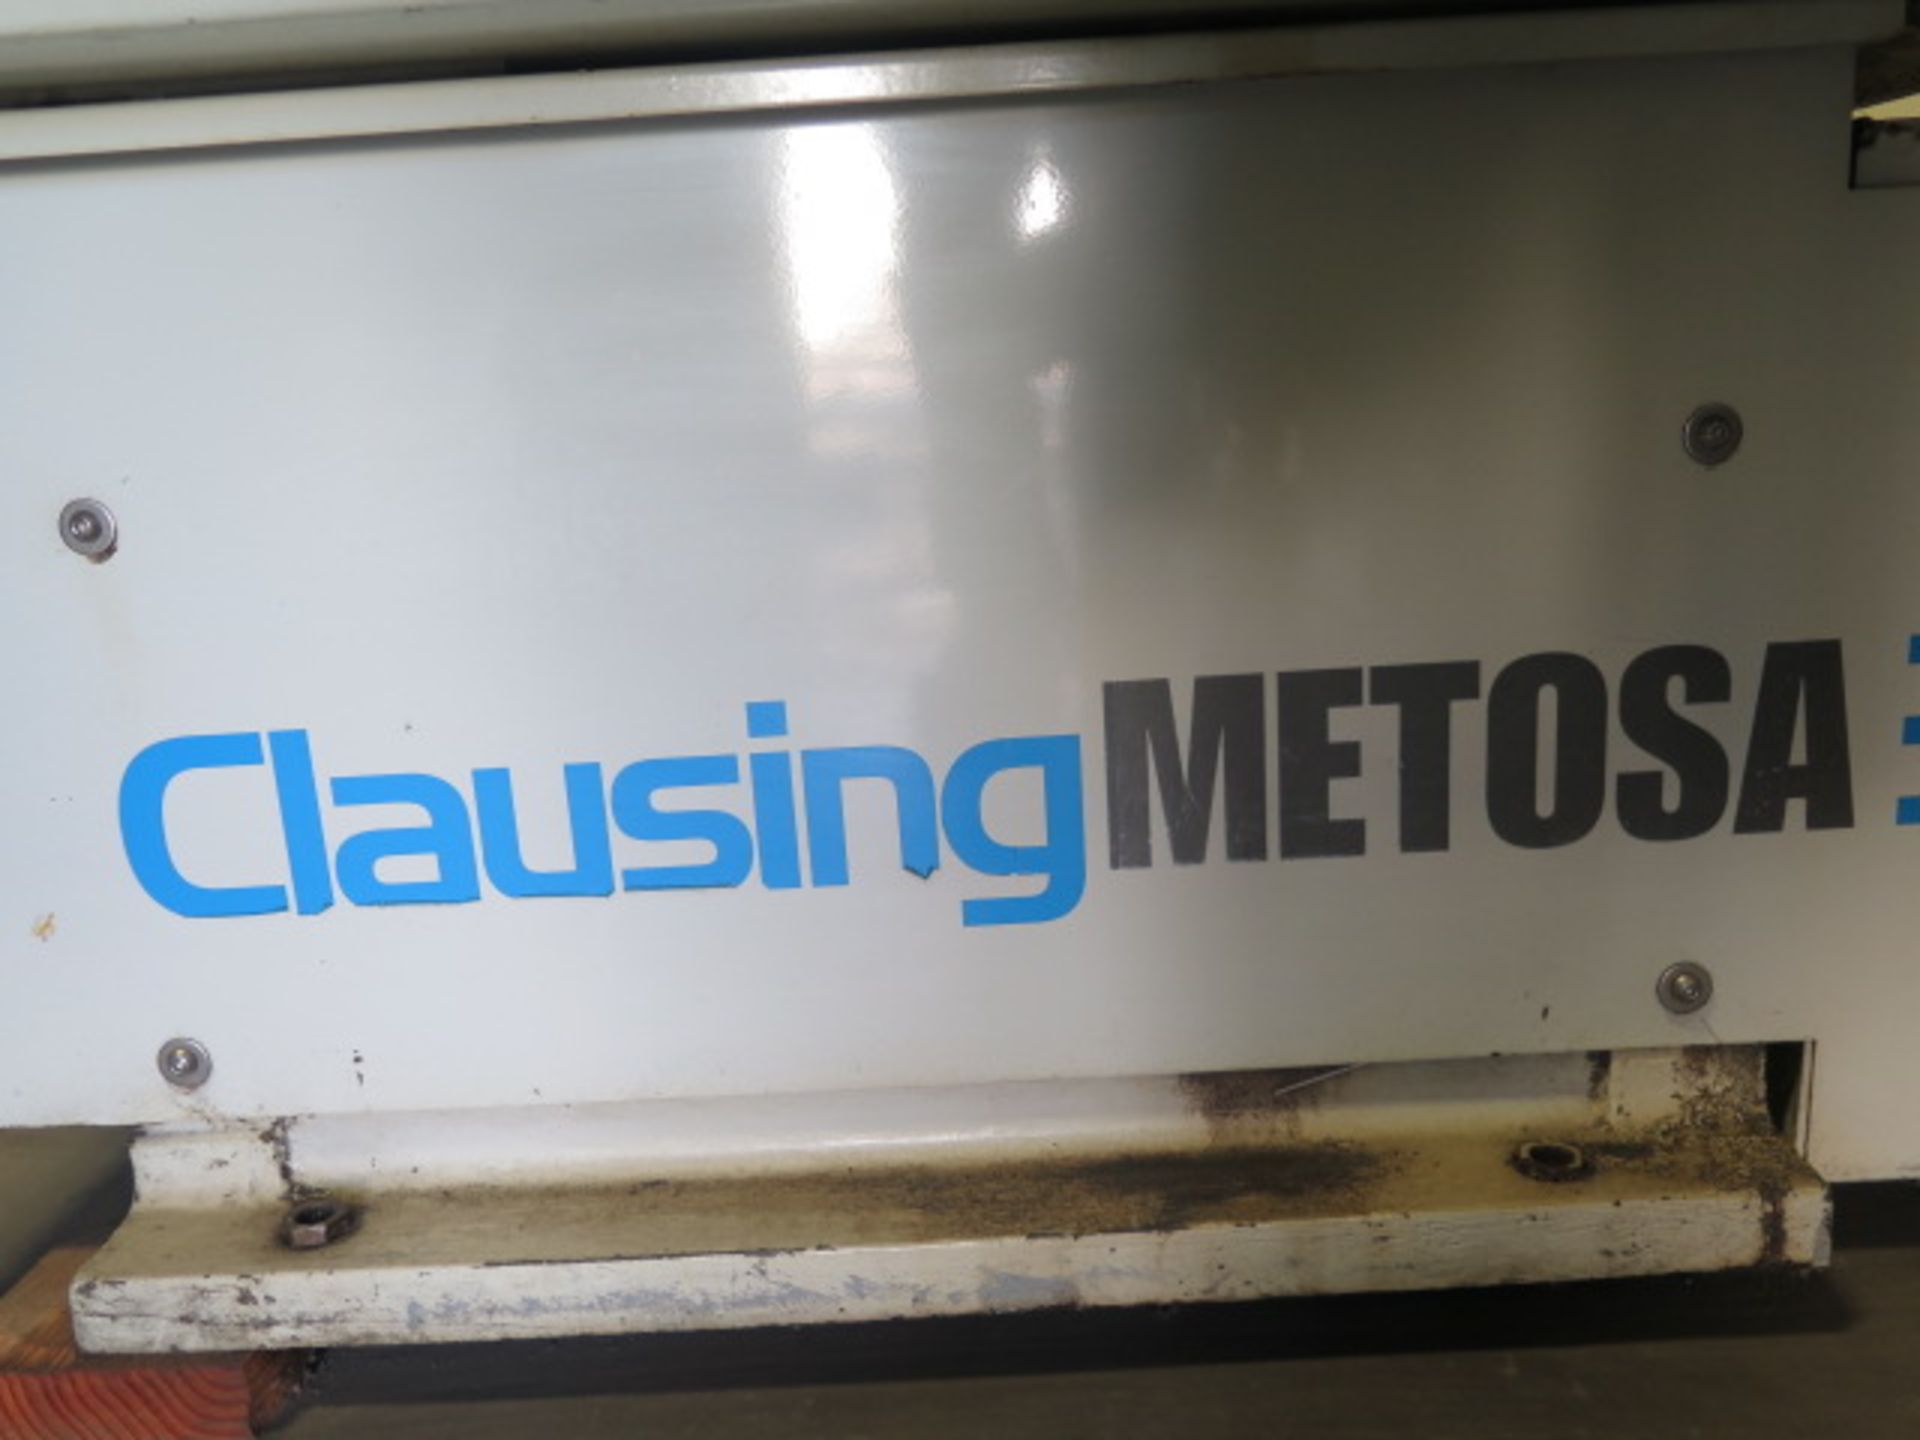 2001 Clausing Metosa SM1560VS 15” x 60” “Smart Lathe” Soft CNC Gap Bed lathe, SOLD AS IS - Image 13 of 14